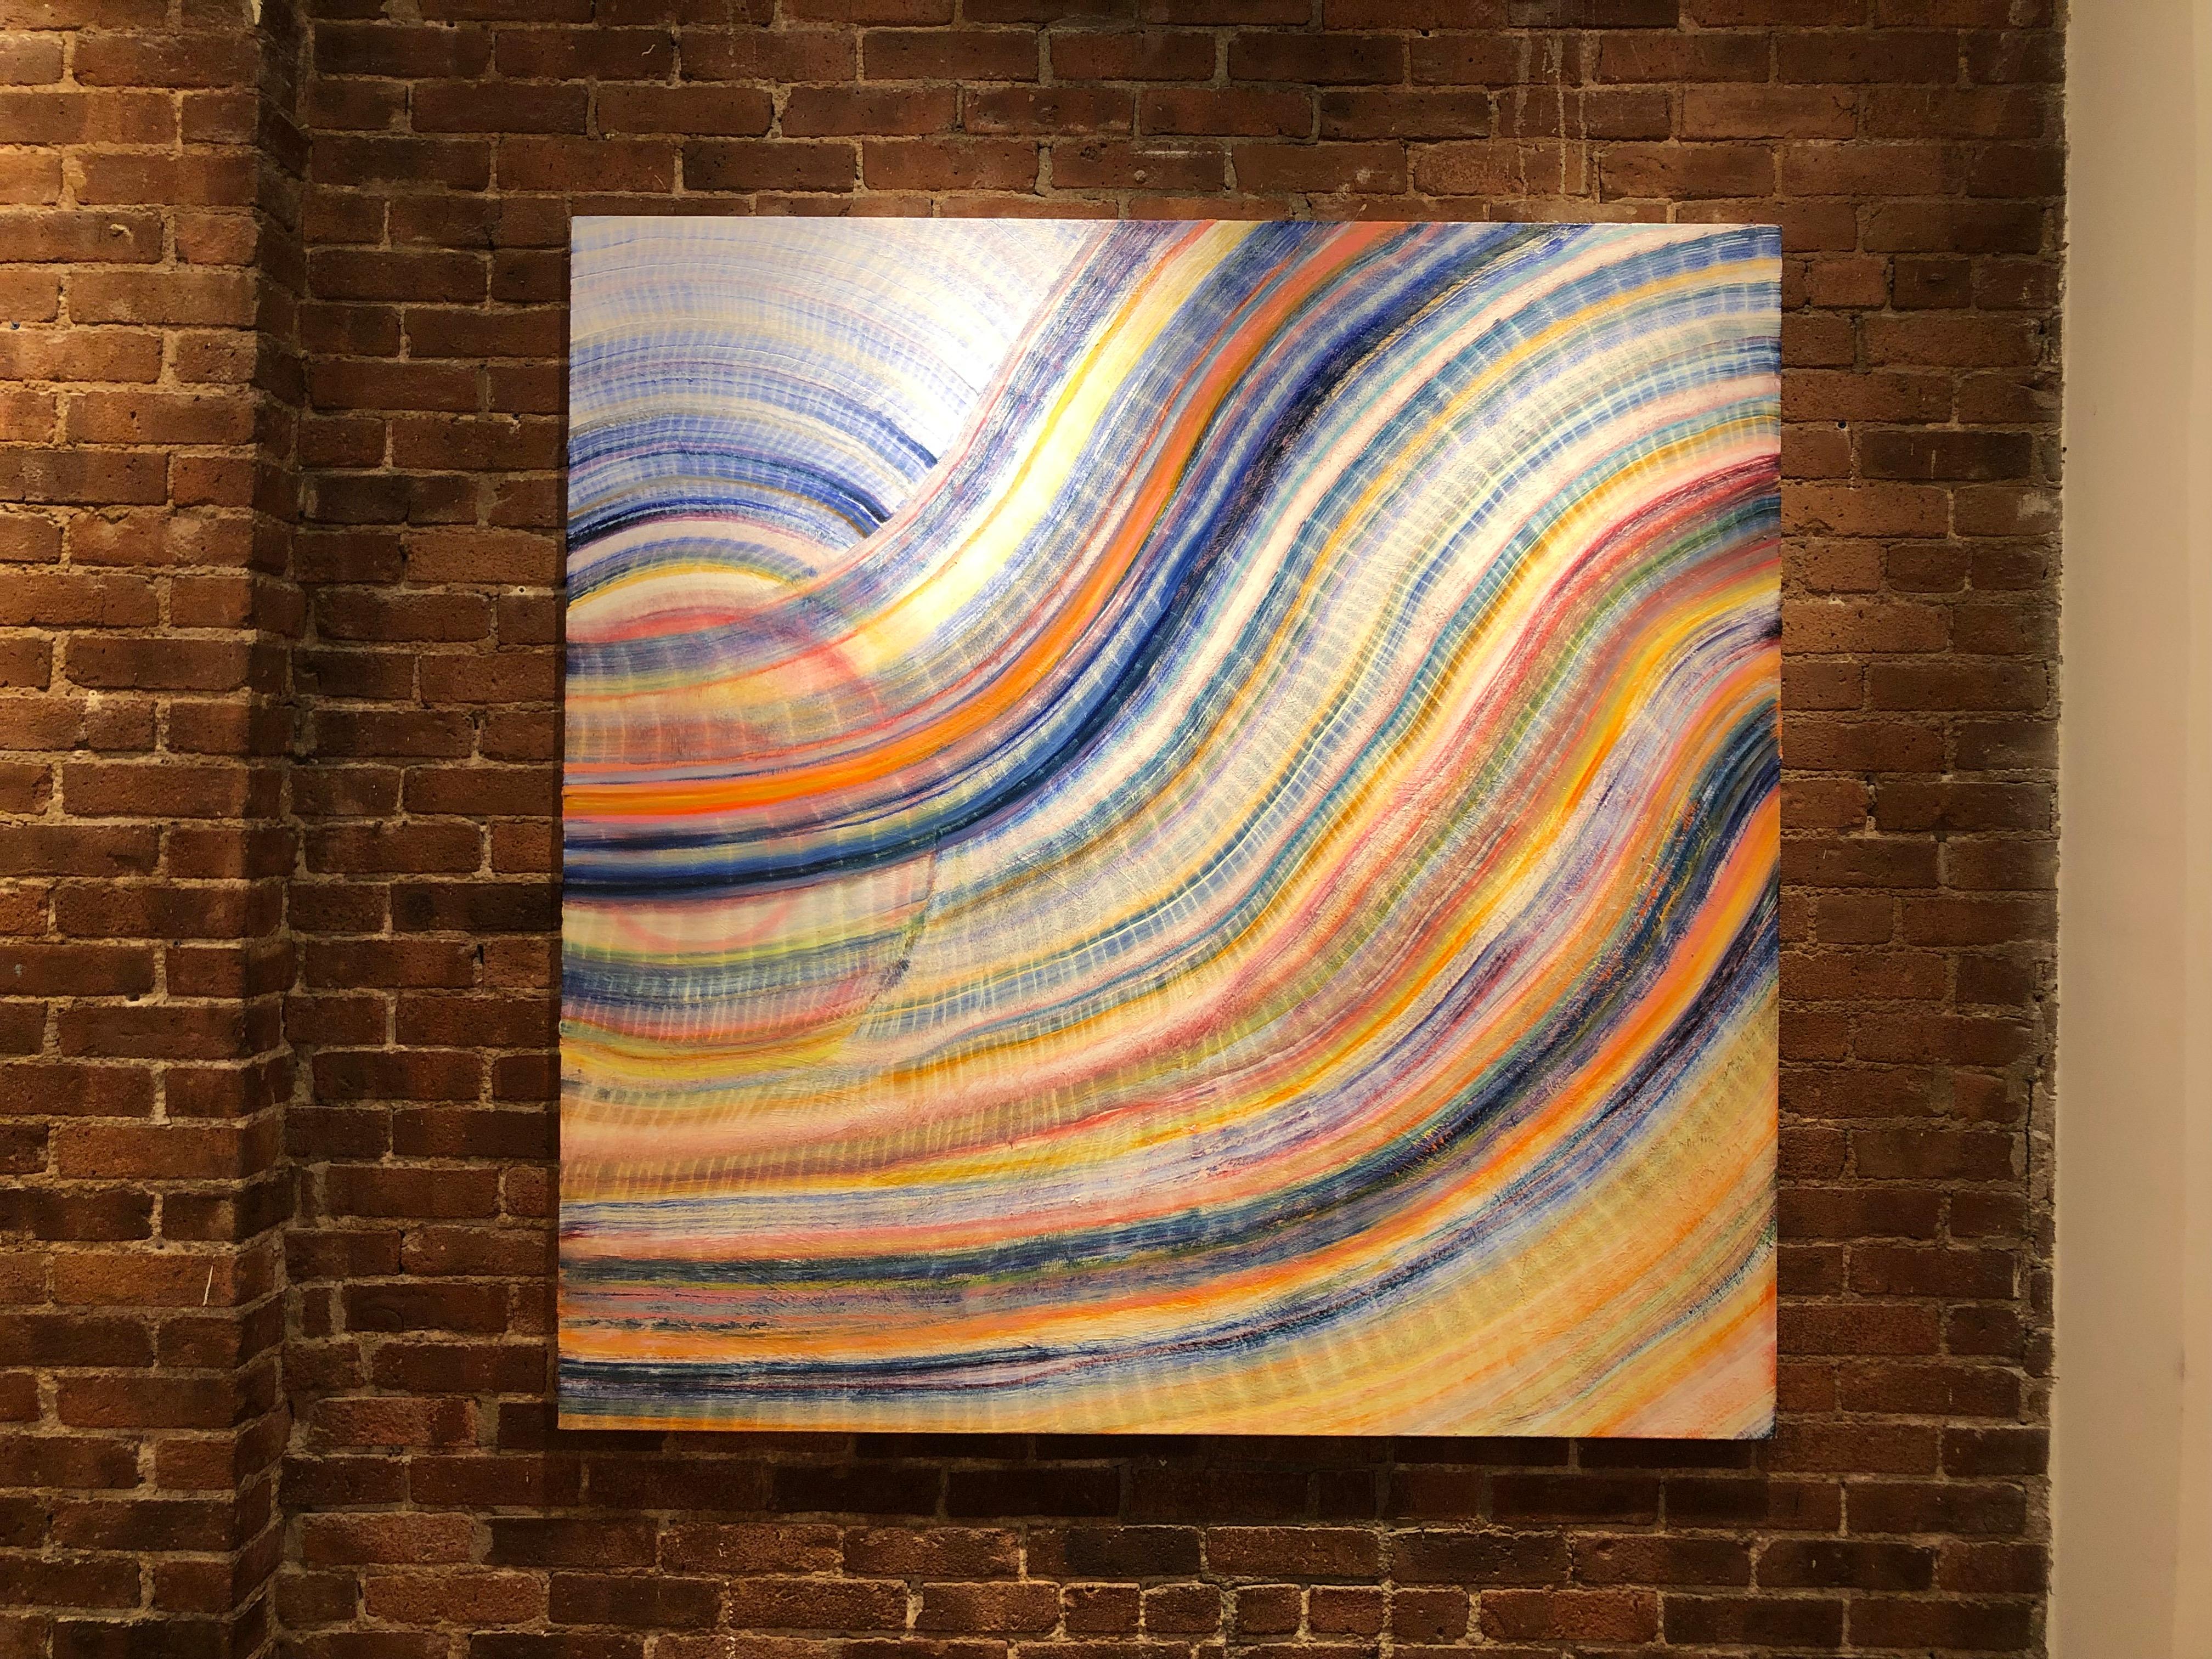 Danielle Riede’s abstract oil paintings are sublime in scale and in palette. These latest works expand on her interest in dance and movement expressed in luminous color. Fascinated by the ephemerality of movement, Danielle Riede physicalizes the